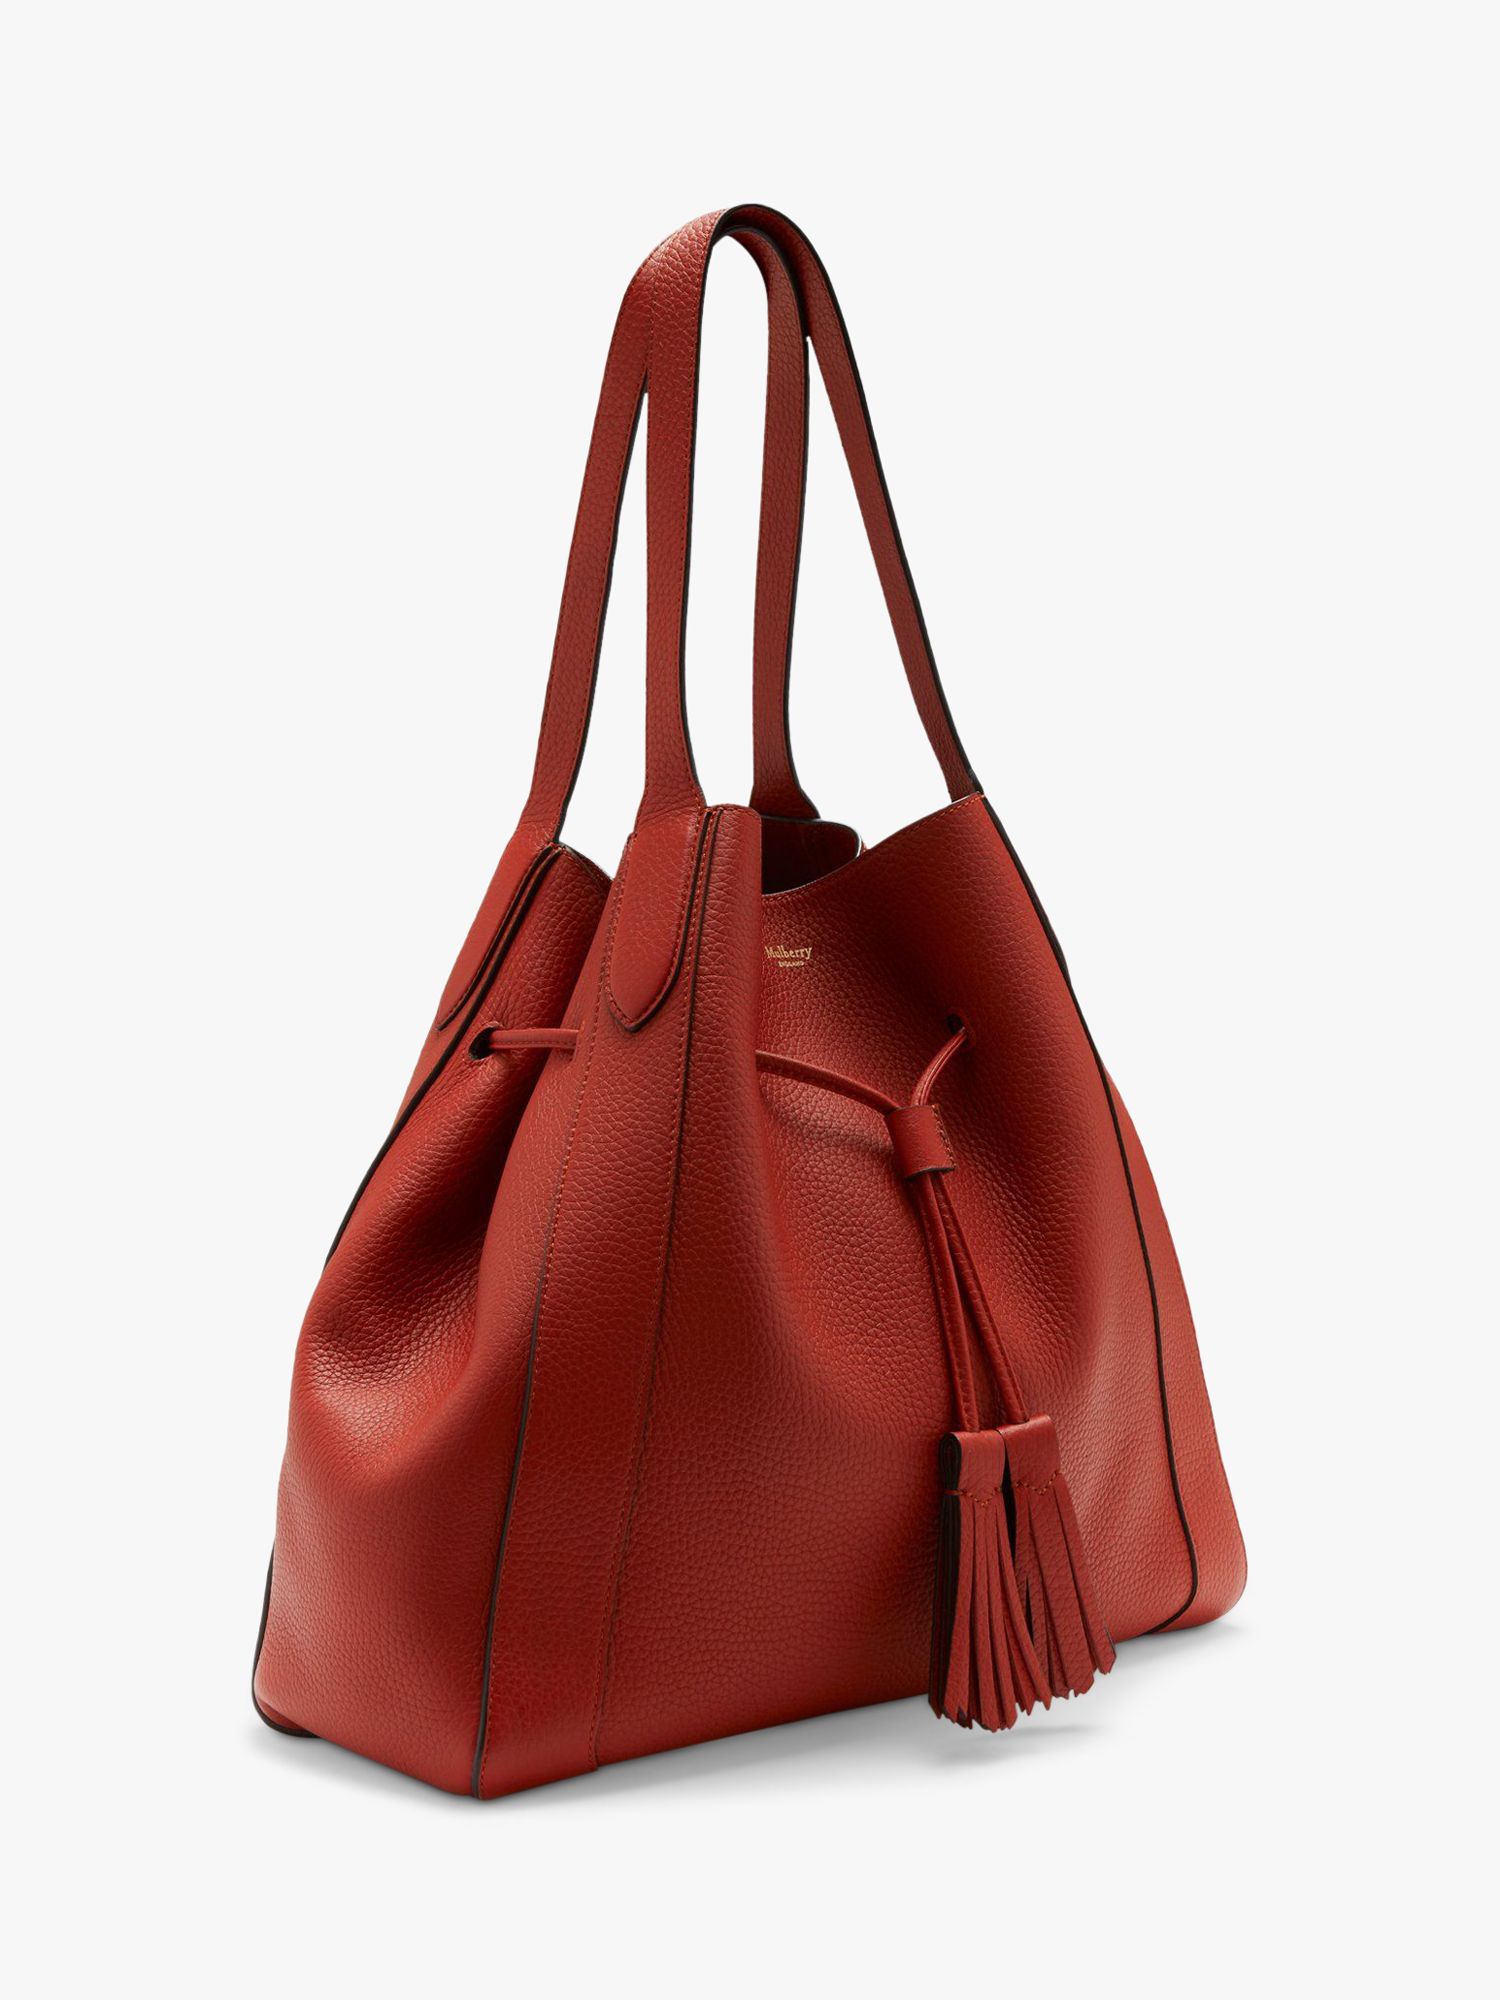 Mulberry Millie Heavy Grain Leather Tote Bag, Rust at John Lewis & Partners